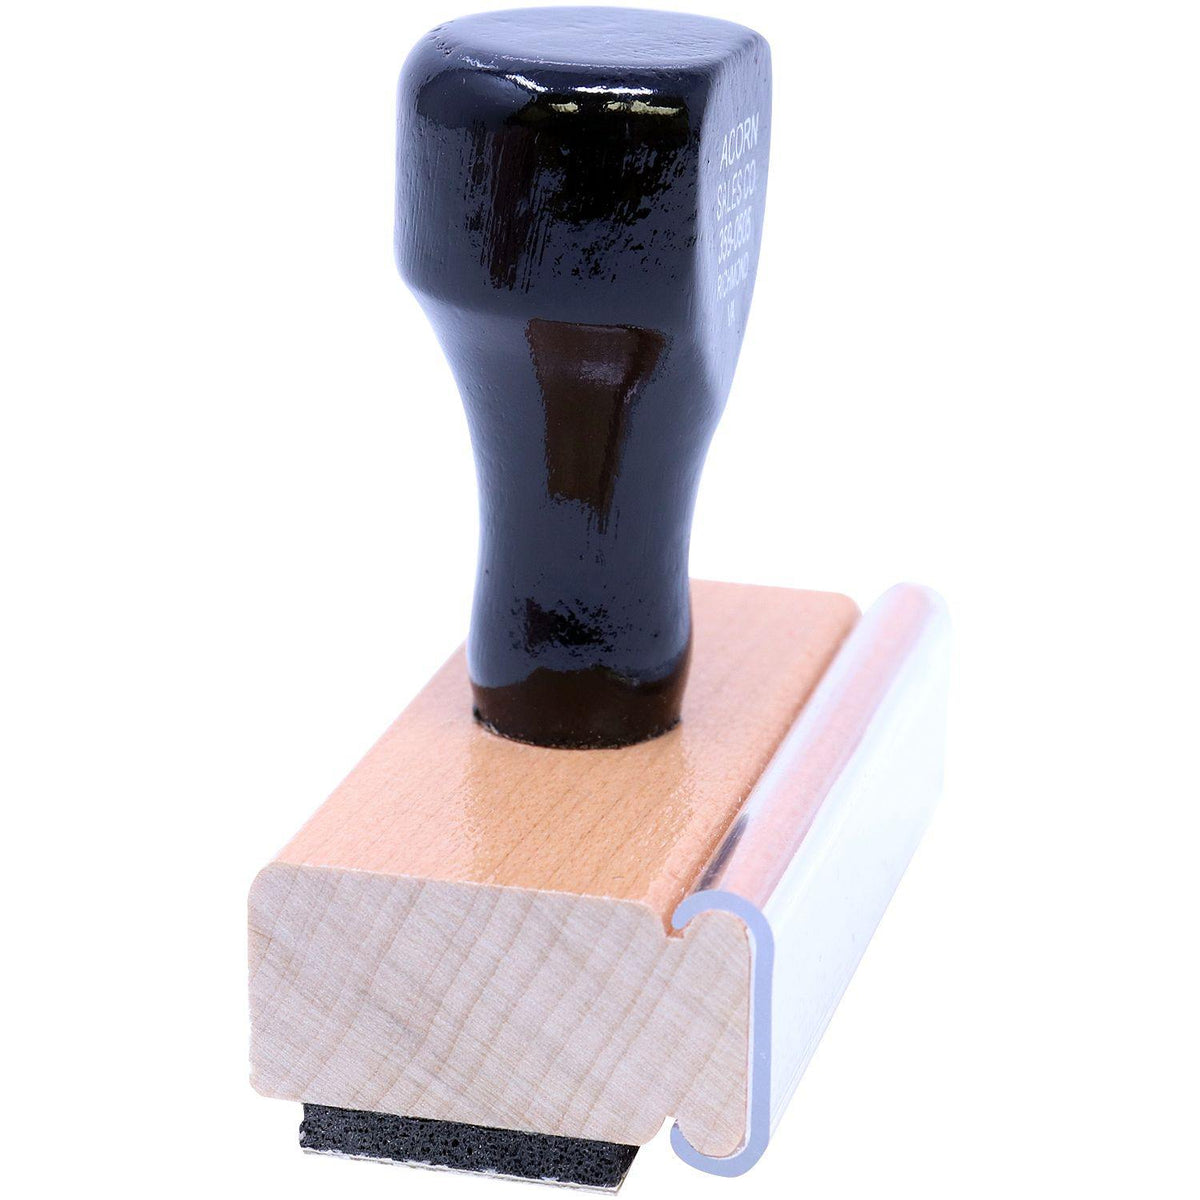 Side View of Copy Outline Text Rubber Stamp at an Angle